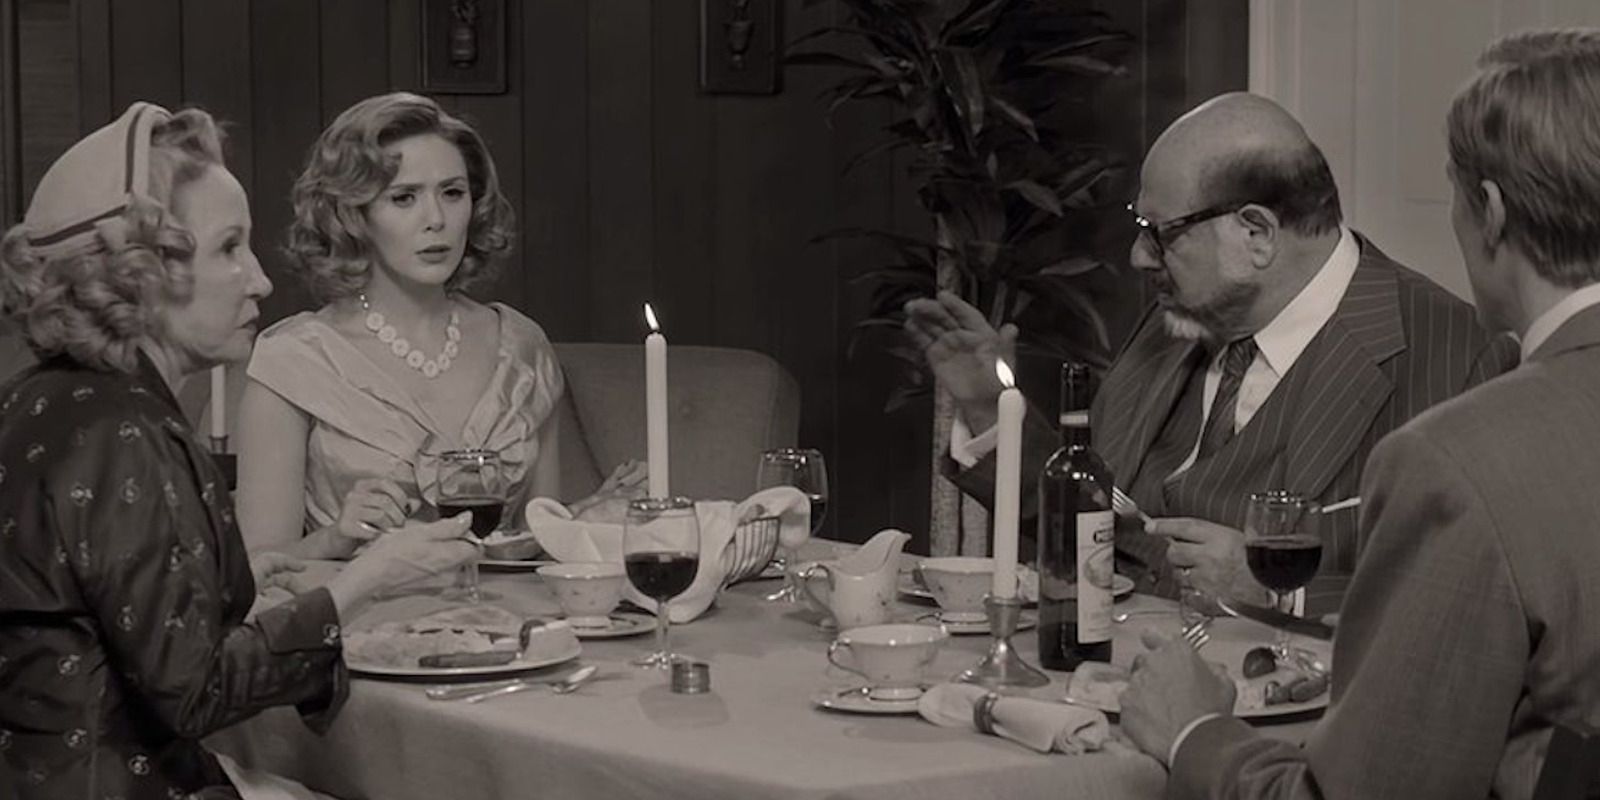 Mr. Hart and Mrs Hart confront Wanda and Vision during dinner Wandavision